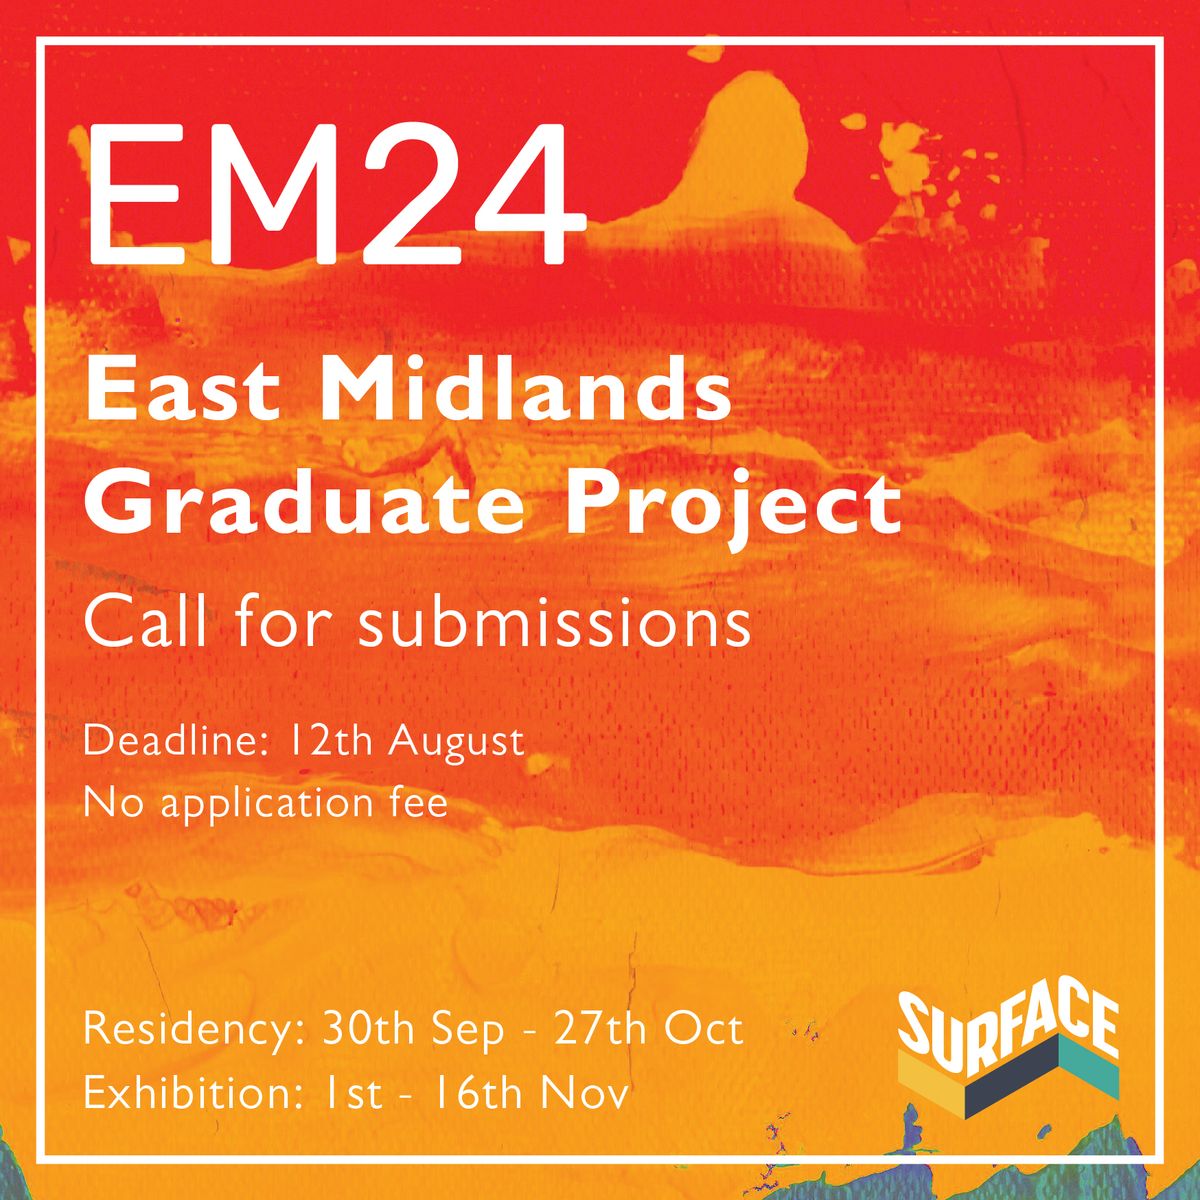 East Midlands Graduate Project: EM24: Call for Submissions